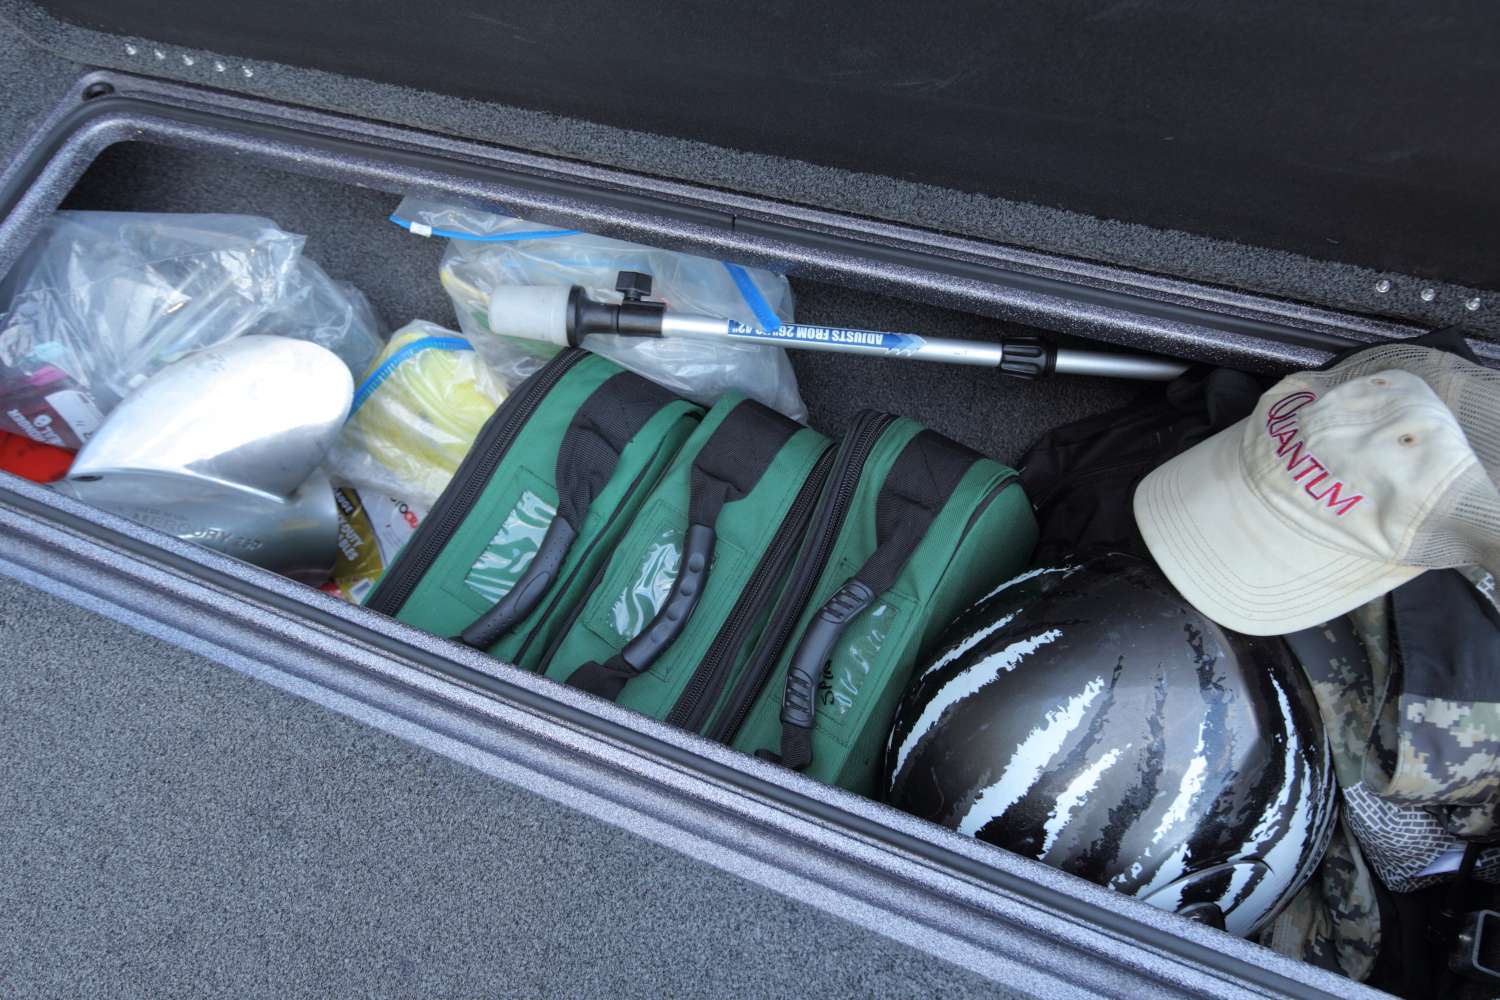 The right rod locker looks to be a catch-all for different items. Here, the three green bags hold Lee's spare reels.